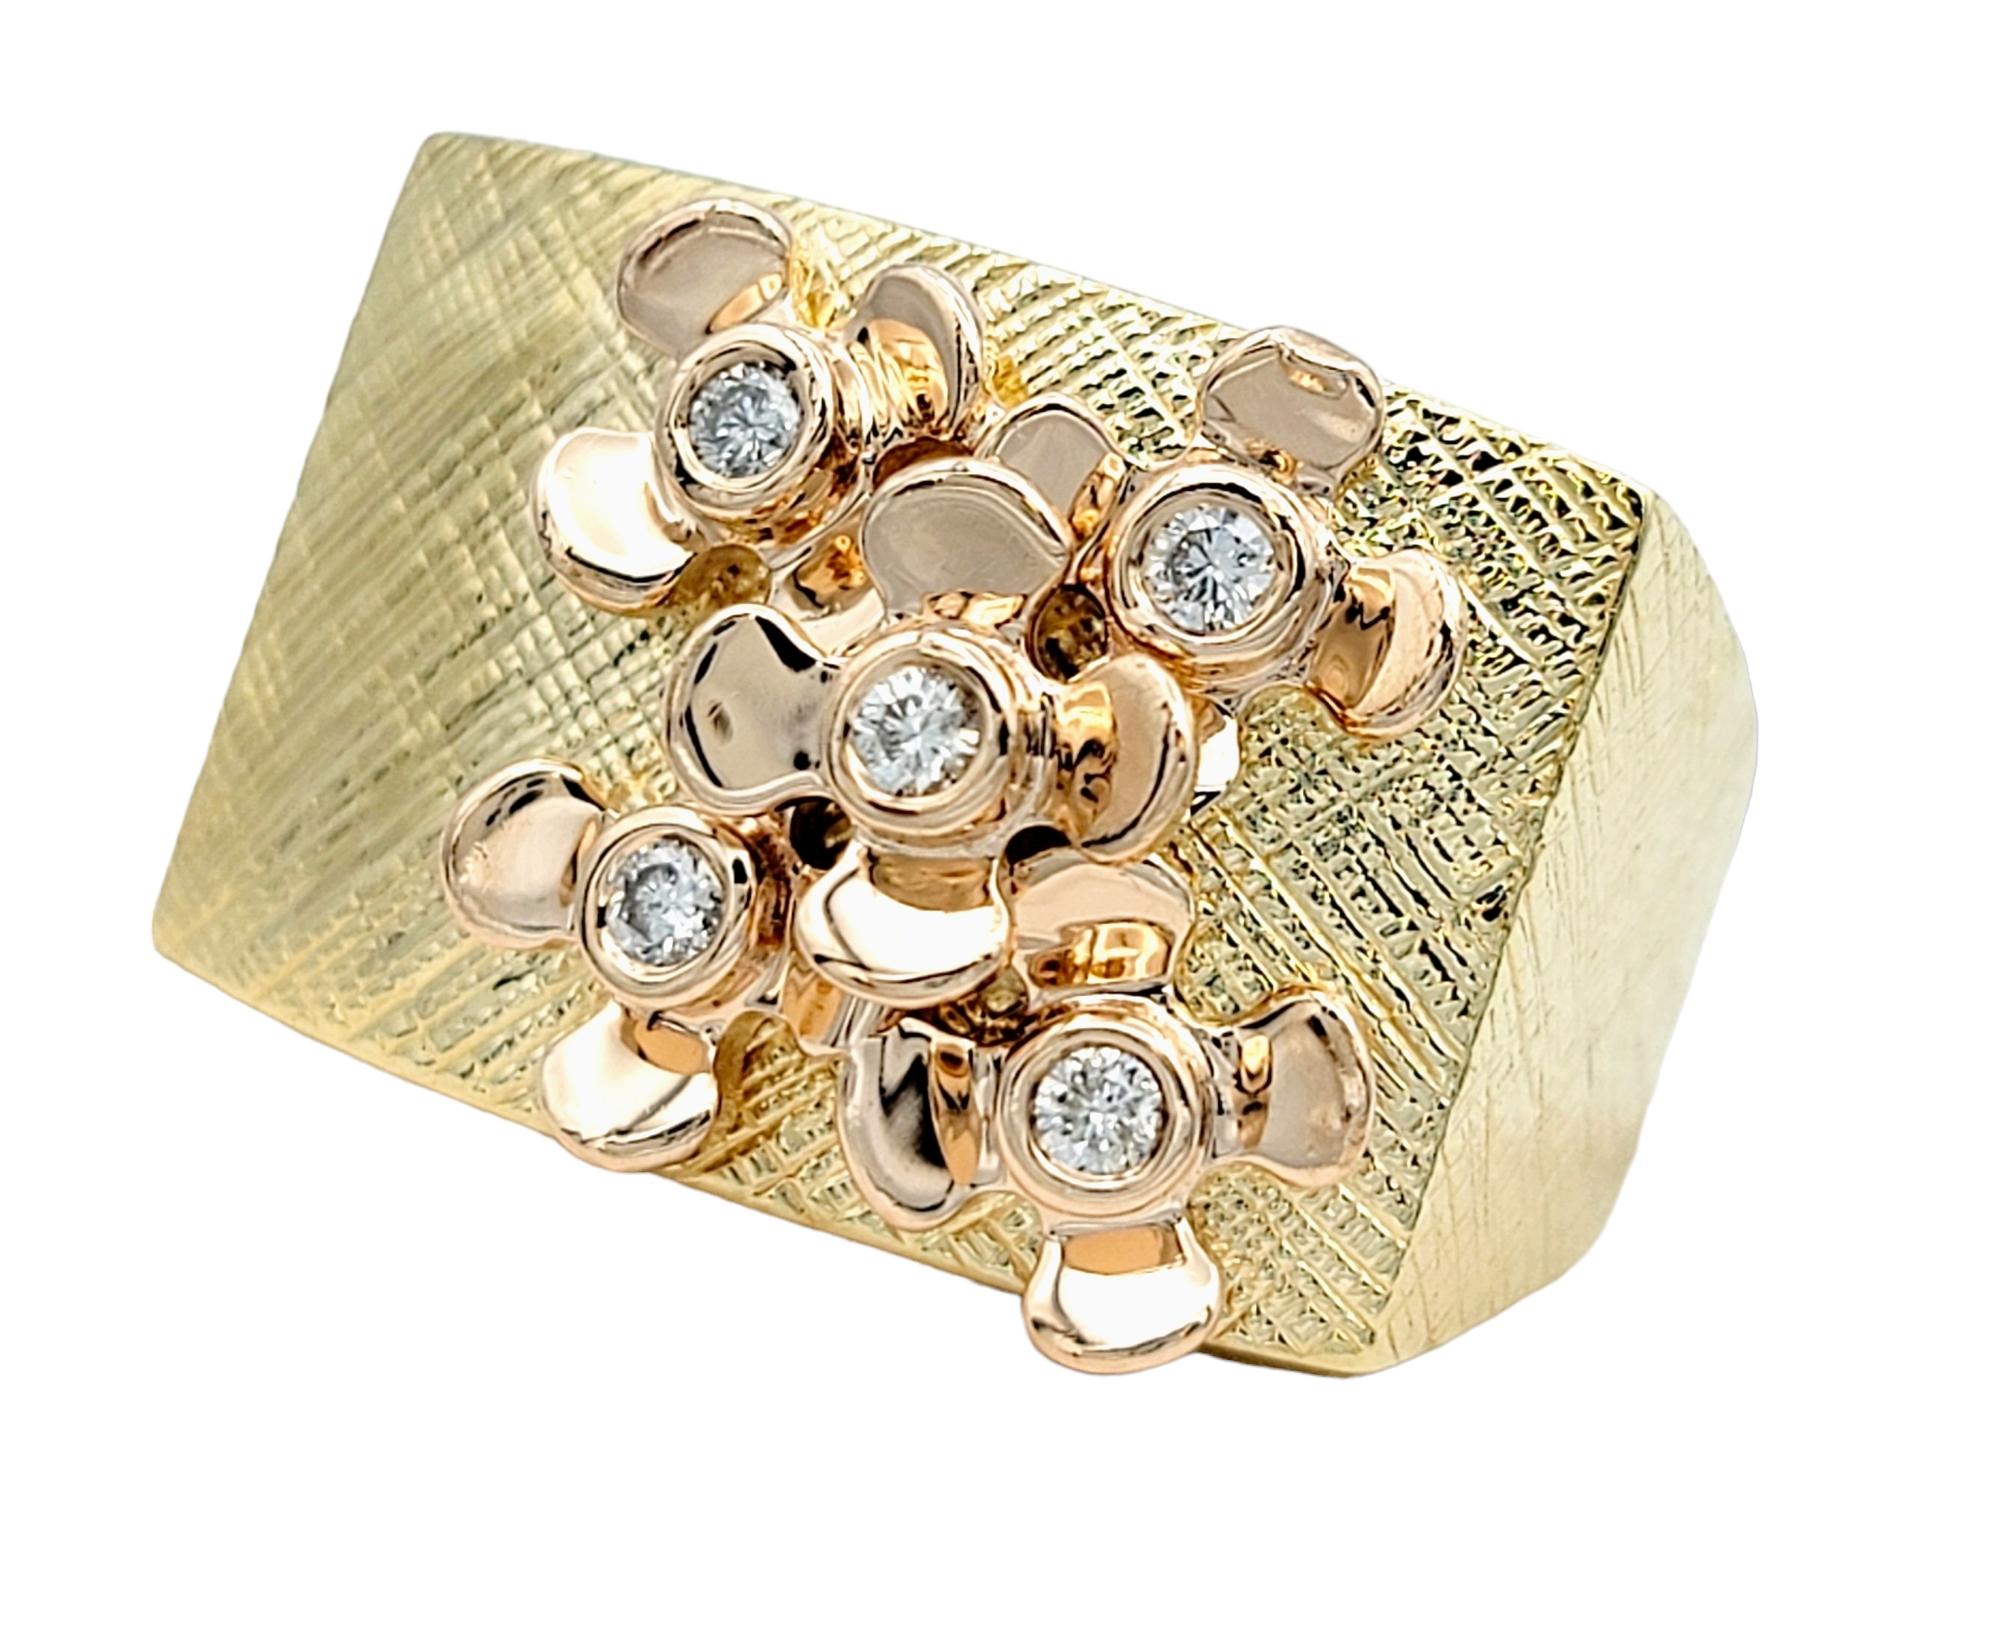 Ring size: 8

Introducing an elegant and stylish piece by Sonia B. Designs: a two toned floral motif cocktail ring with diamonds. A true beauty that seamlessly blends classic sophistication with contemporary flair. 

At the heart of the ring lies a